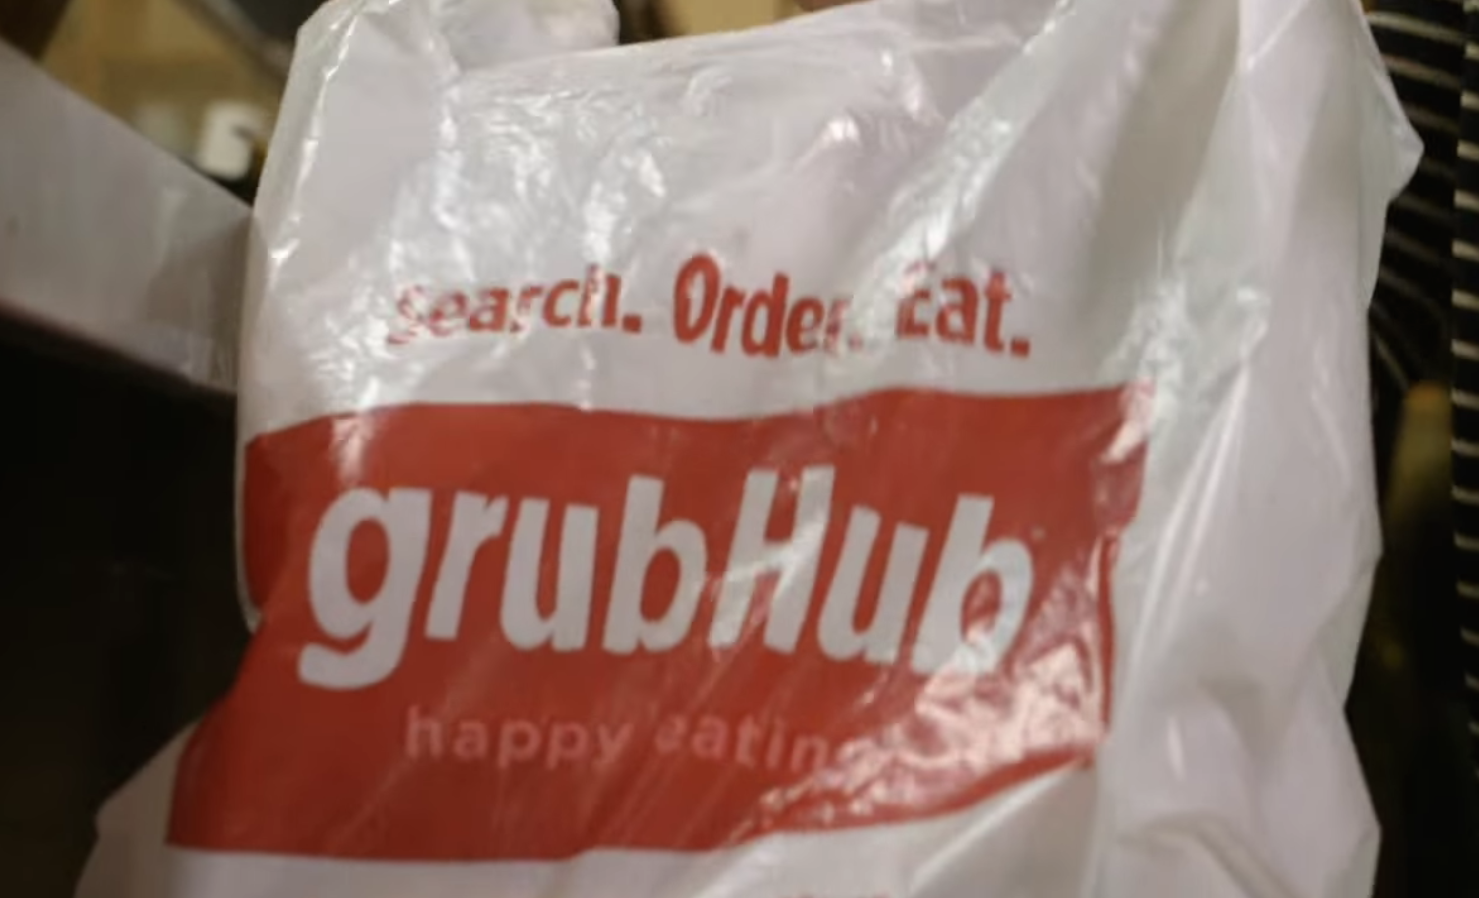 whats the difference between seamless and grubhub